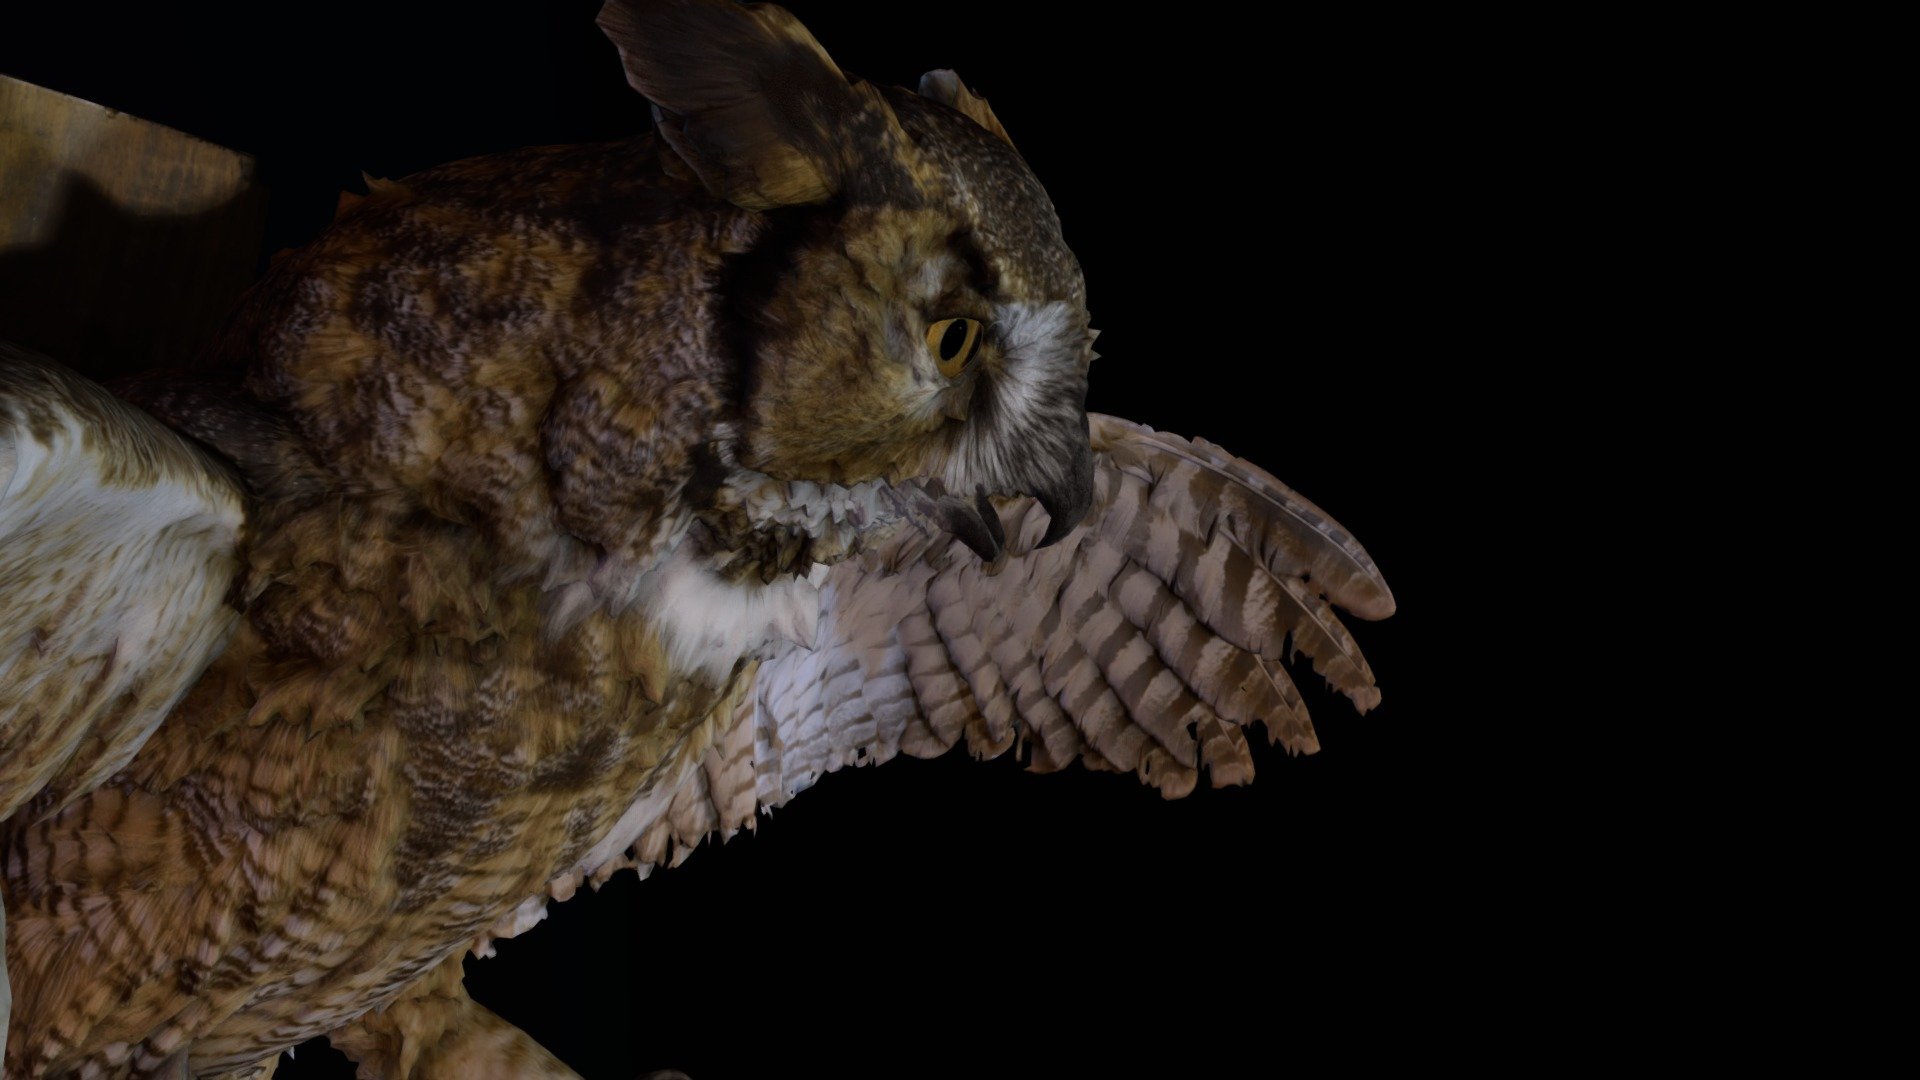 A little side project I have been working on just in time for Halloween! A great horned owl captured and recreated in RealityCapture. Post-processing and reconstruction done in Blender, Photoshop, and MeshLab. There was actually a ton of detail that was contained in the original model that unfortunately does not really come through when decimated. I may do a higher res bust of the head in the future, just to see what kind of detail I can accomplish 3d model